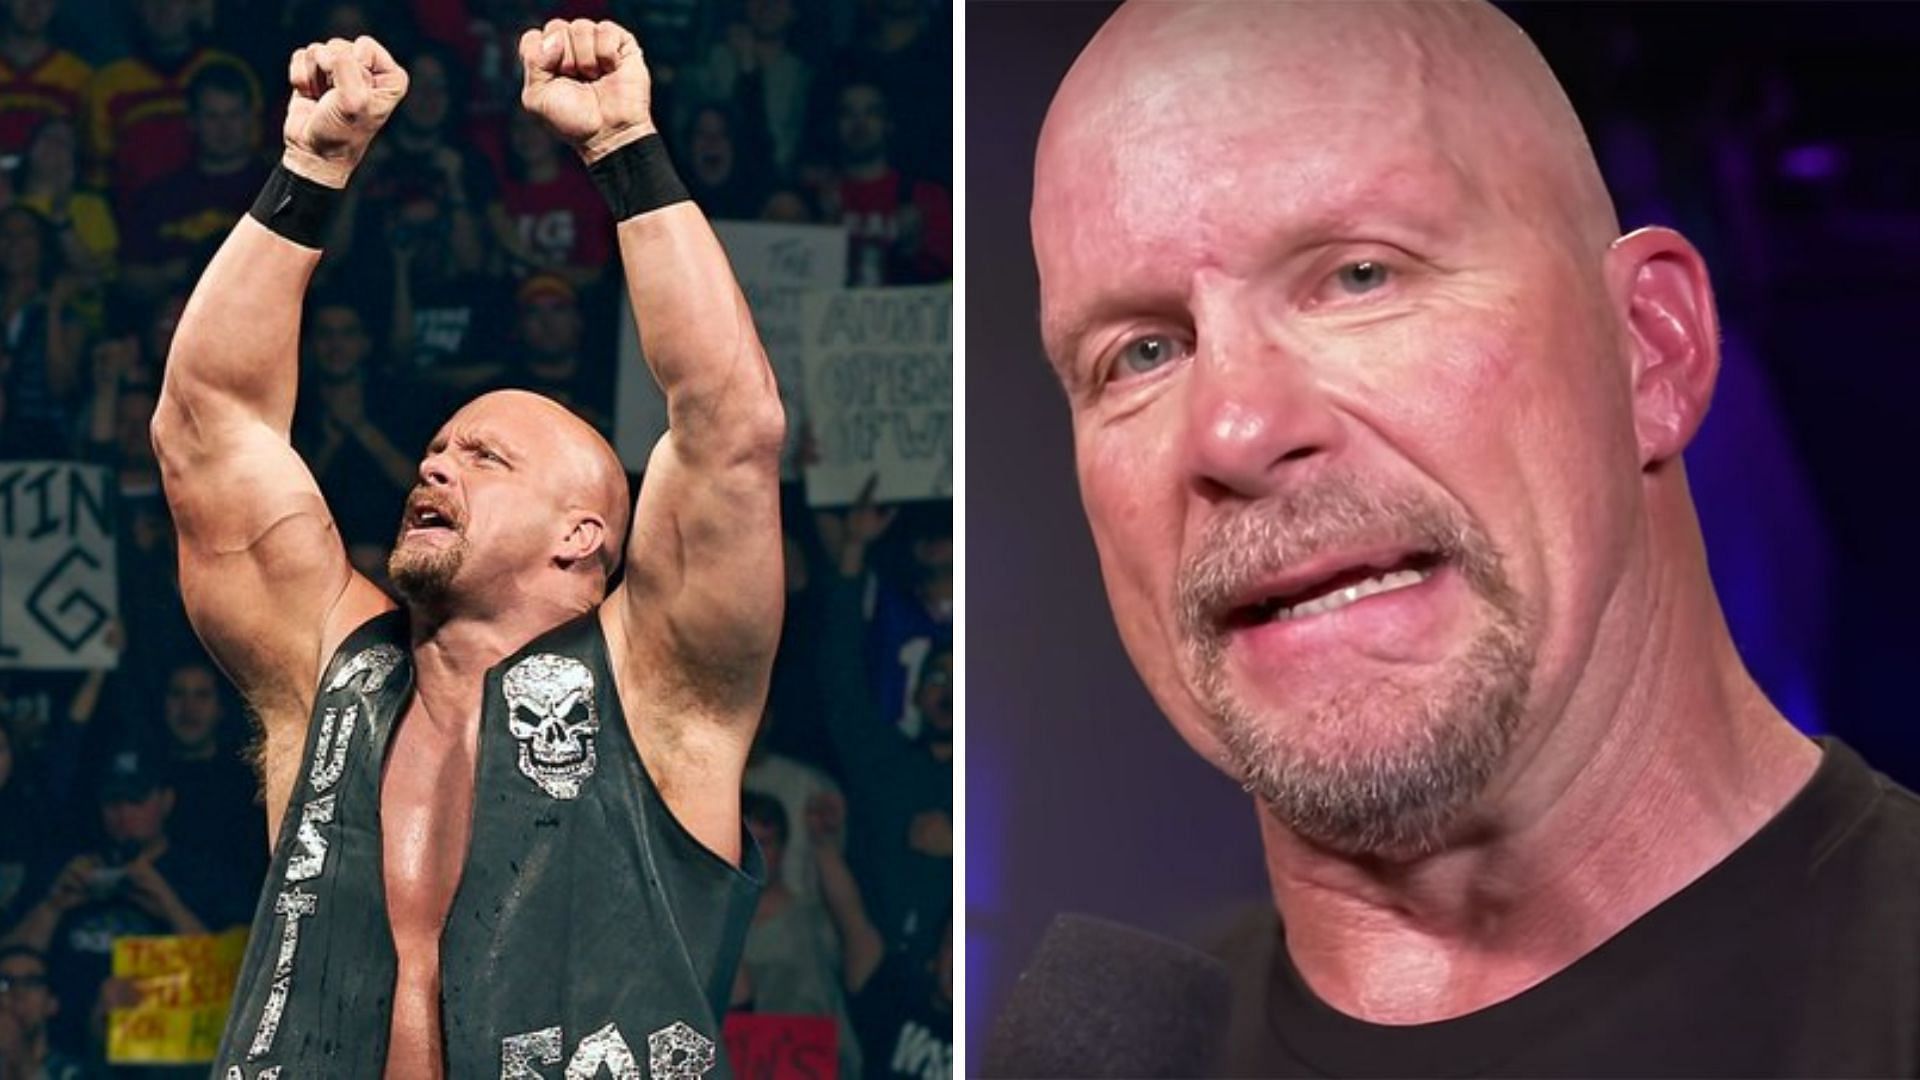 Stone Cold Steve Austin is arguably WWE